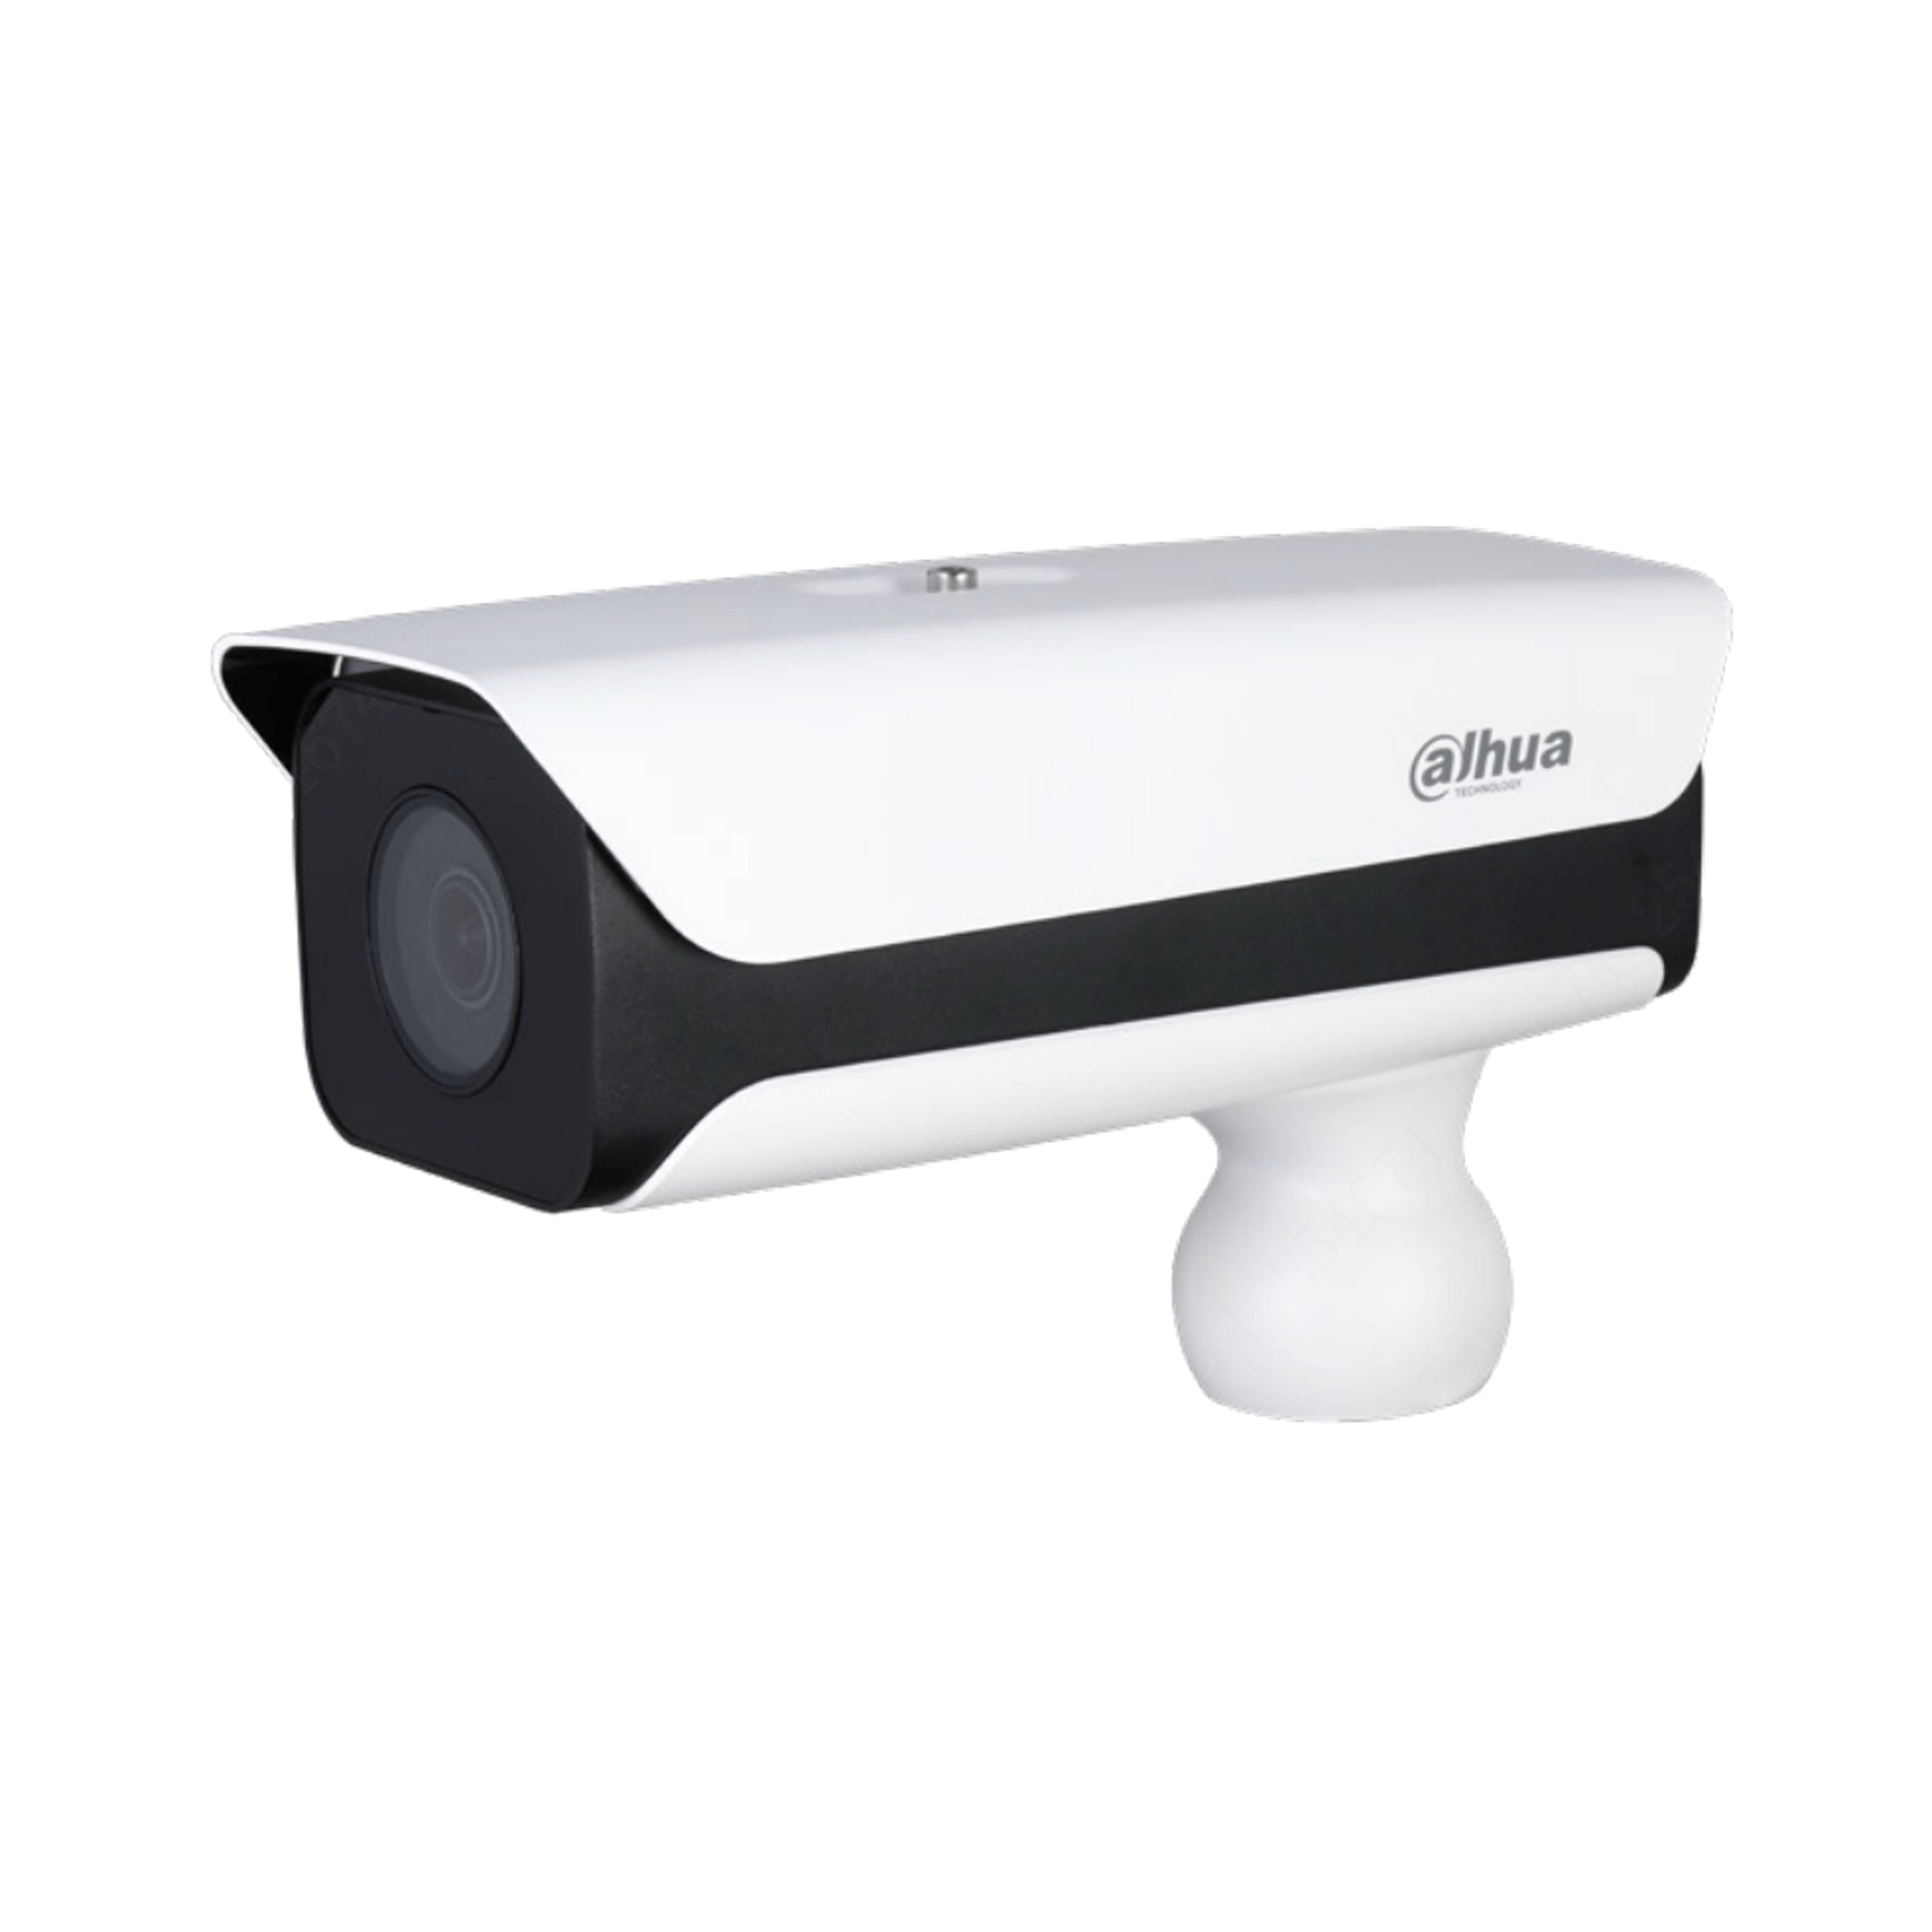 TRAFFIC SERIES IP CAMERA WHITE ANPR/LPR DETECTION DISTANCE 3-6M 2MP/1080P H.264/5/ MJPEG BULLET DIGITAL WDR PLASTIC/METAL 3.2-10.5MMMOTORISED LENS 3X ZOOM IR 12M POE+ IP67 WITHOUT MIC AUDIO IN AUDIO OUT 3 x ALARM IN 3 x ALARM OUT SUPPORT UP TO 128GB SD 12VDC/24VAC CVBS OUTPUT